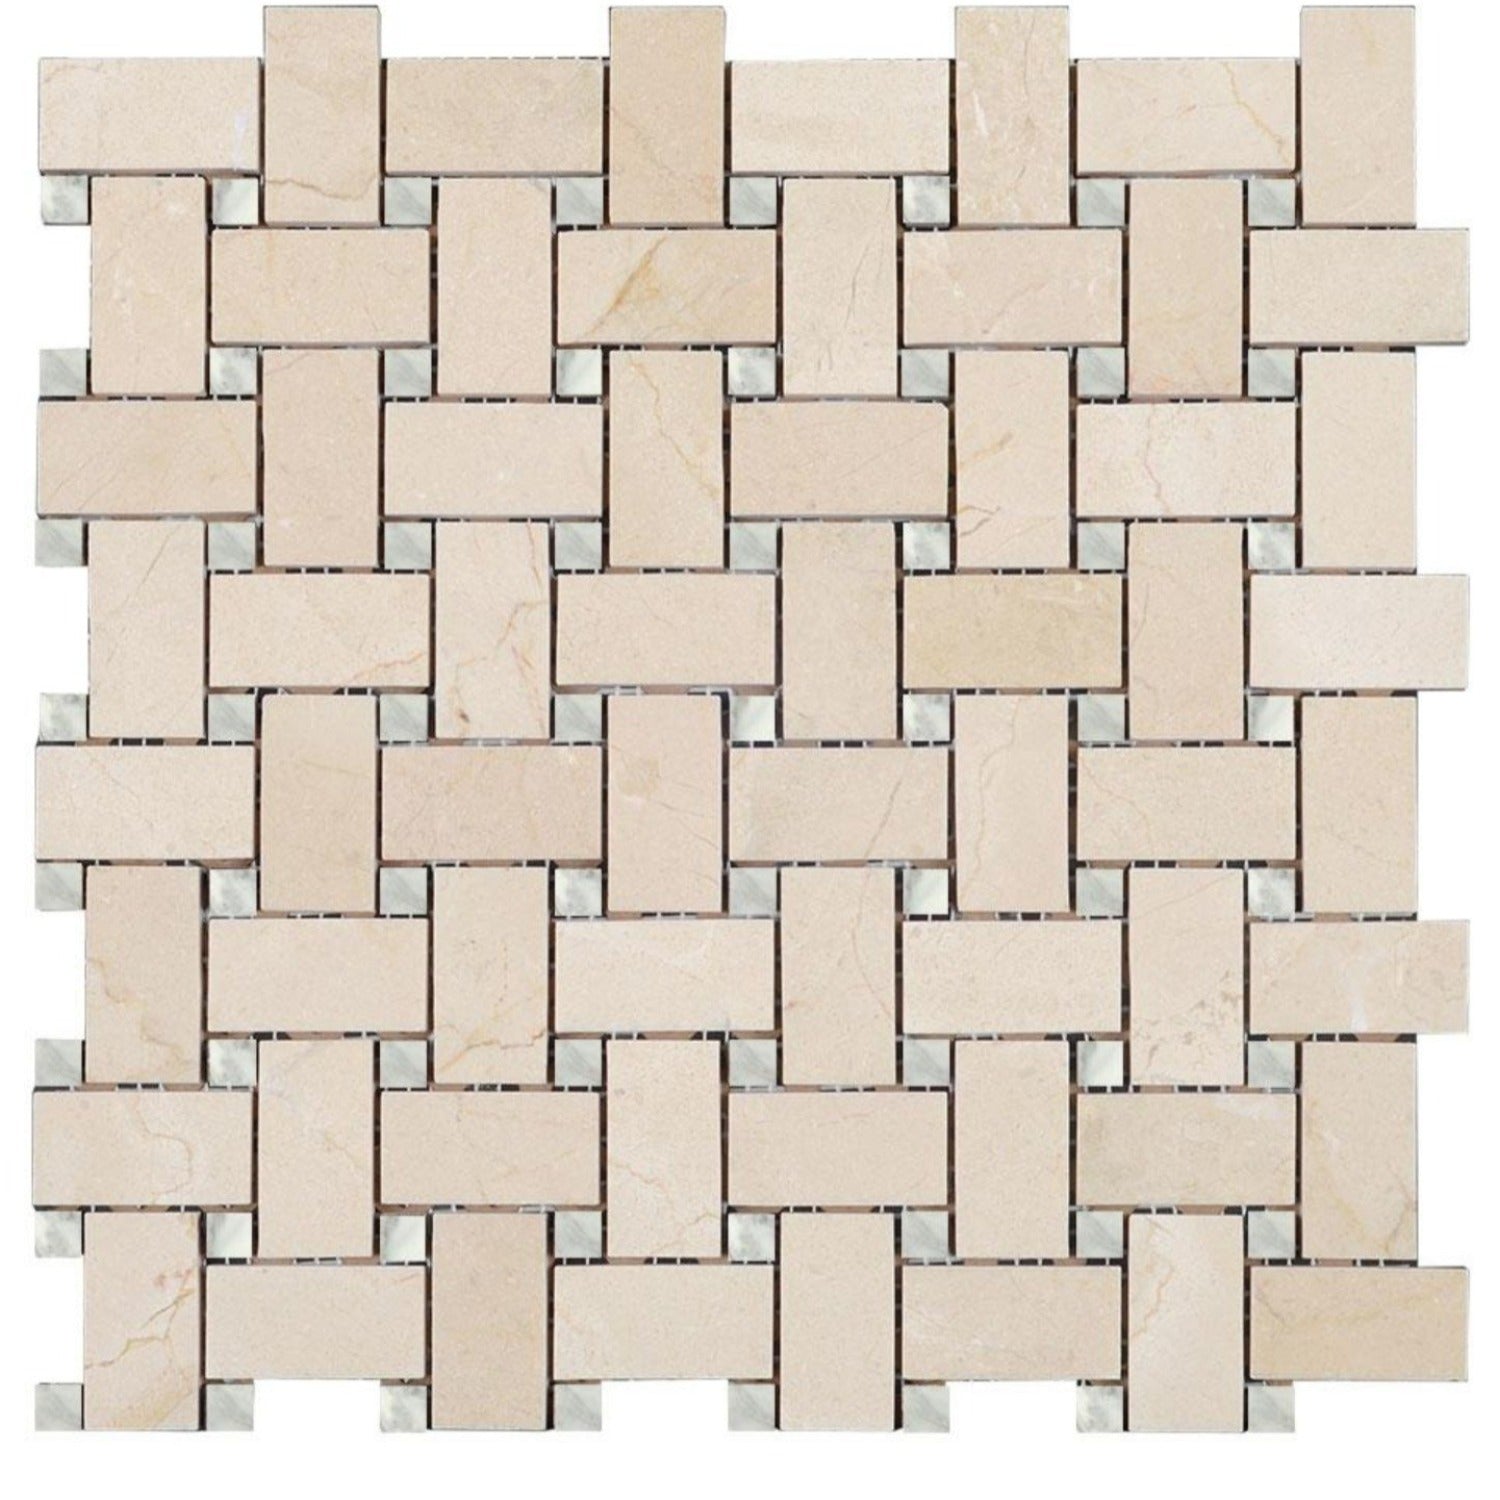 Crema Marfil Polished Marble Basketweave With White Carrara Marble Dot All Marble Tiles